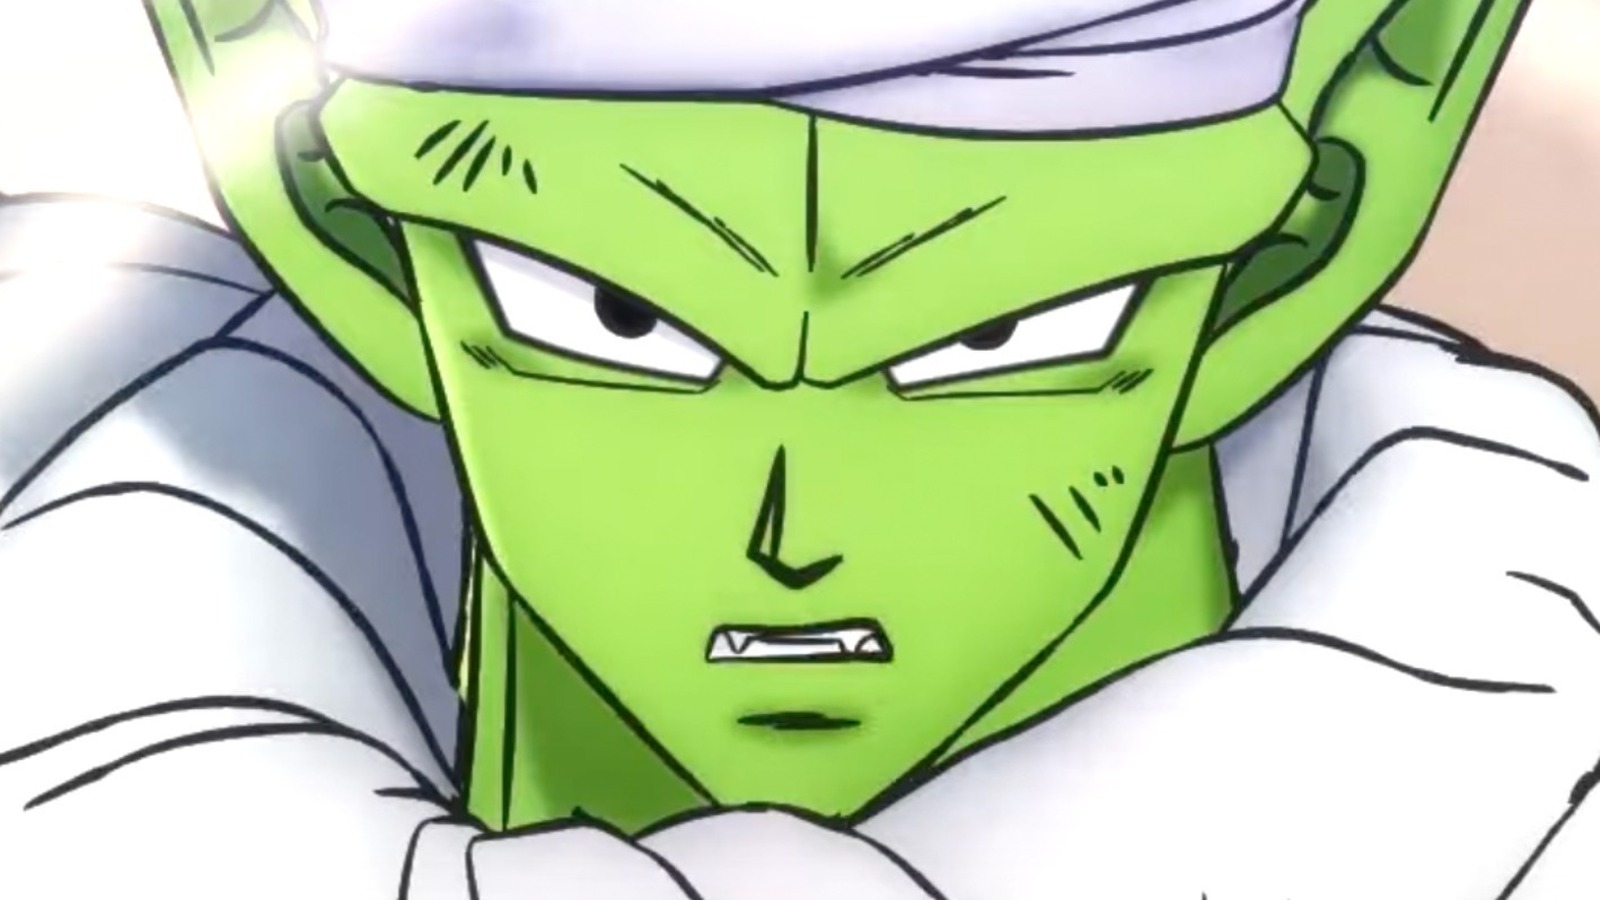 Dragonball reveals how and why Piccolo has the new Orange transformation